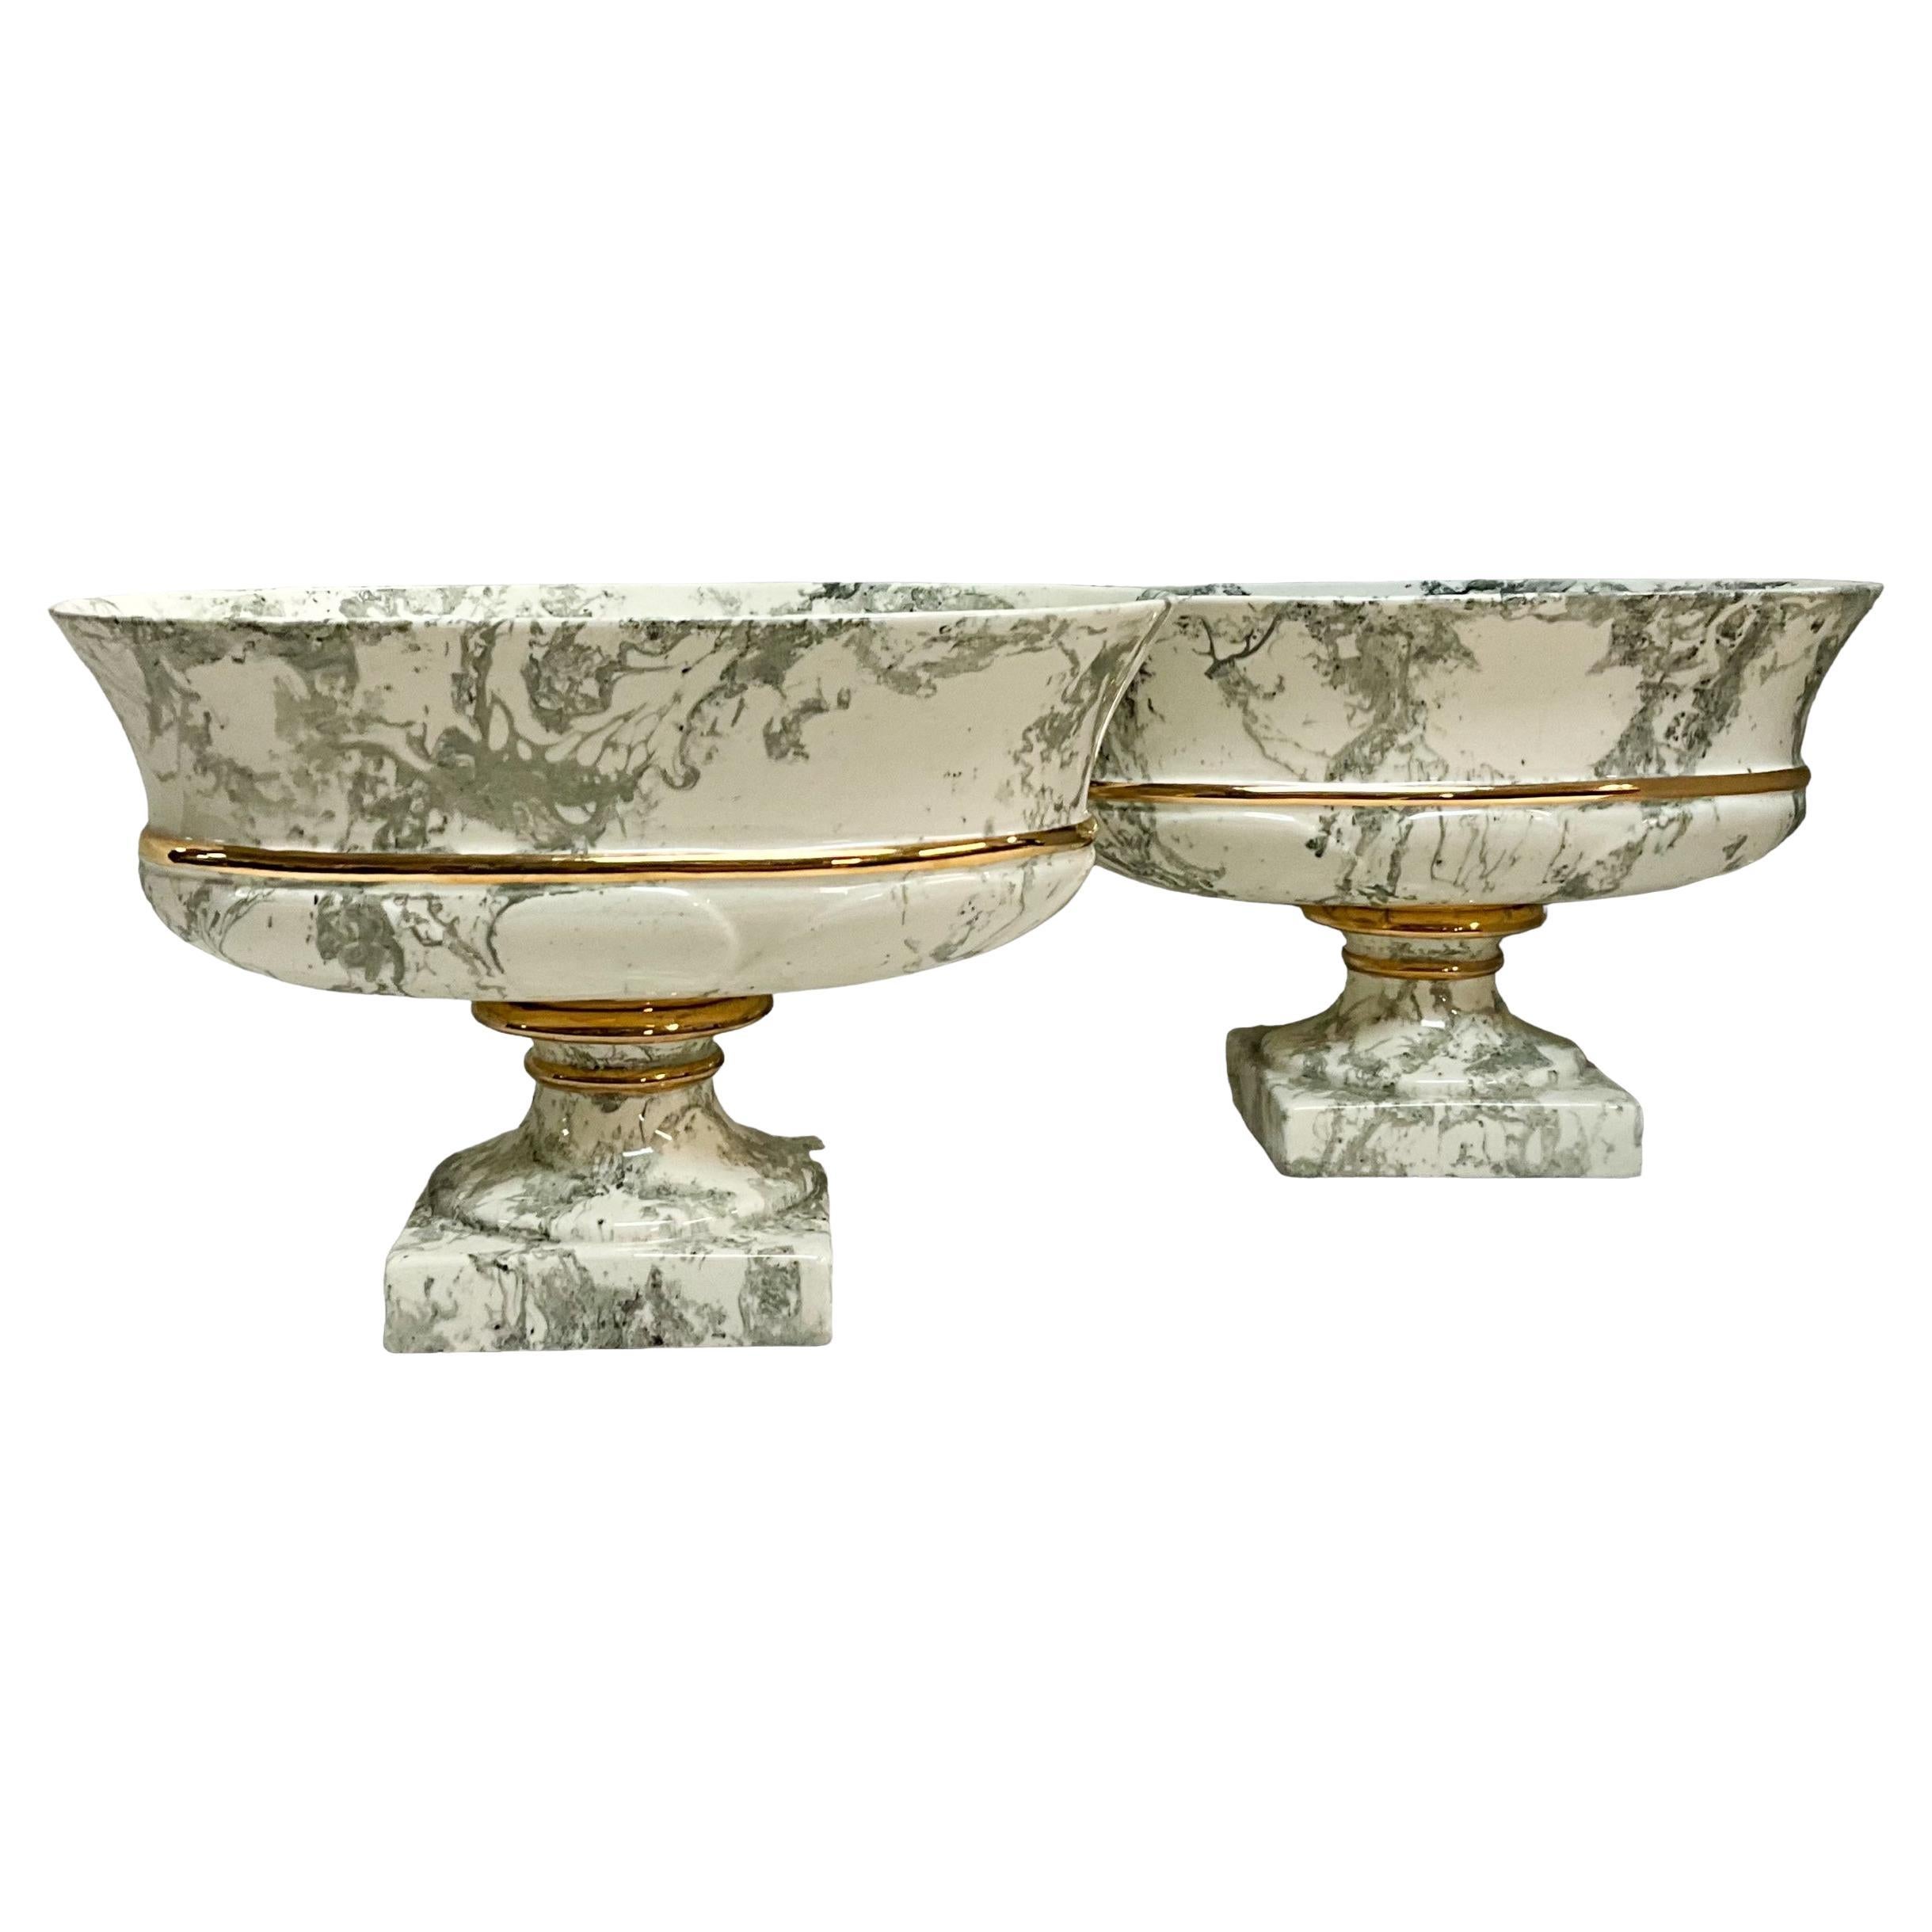 This is a lovely set of faux marbleized ceramic planters with gilt accents. They are ivory with great veins. They are unmarked.  